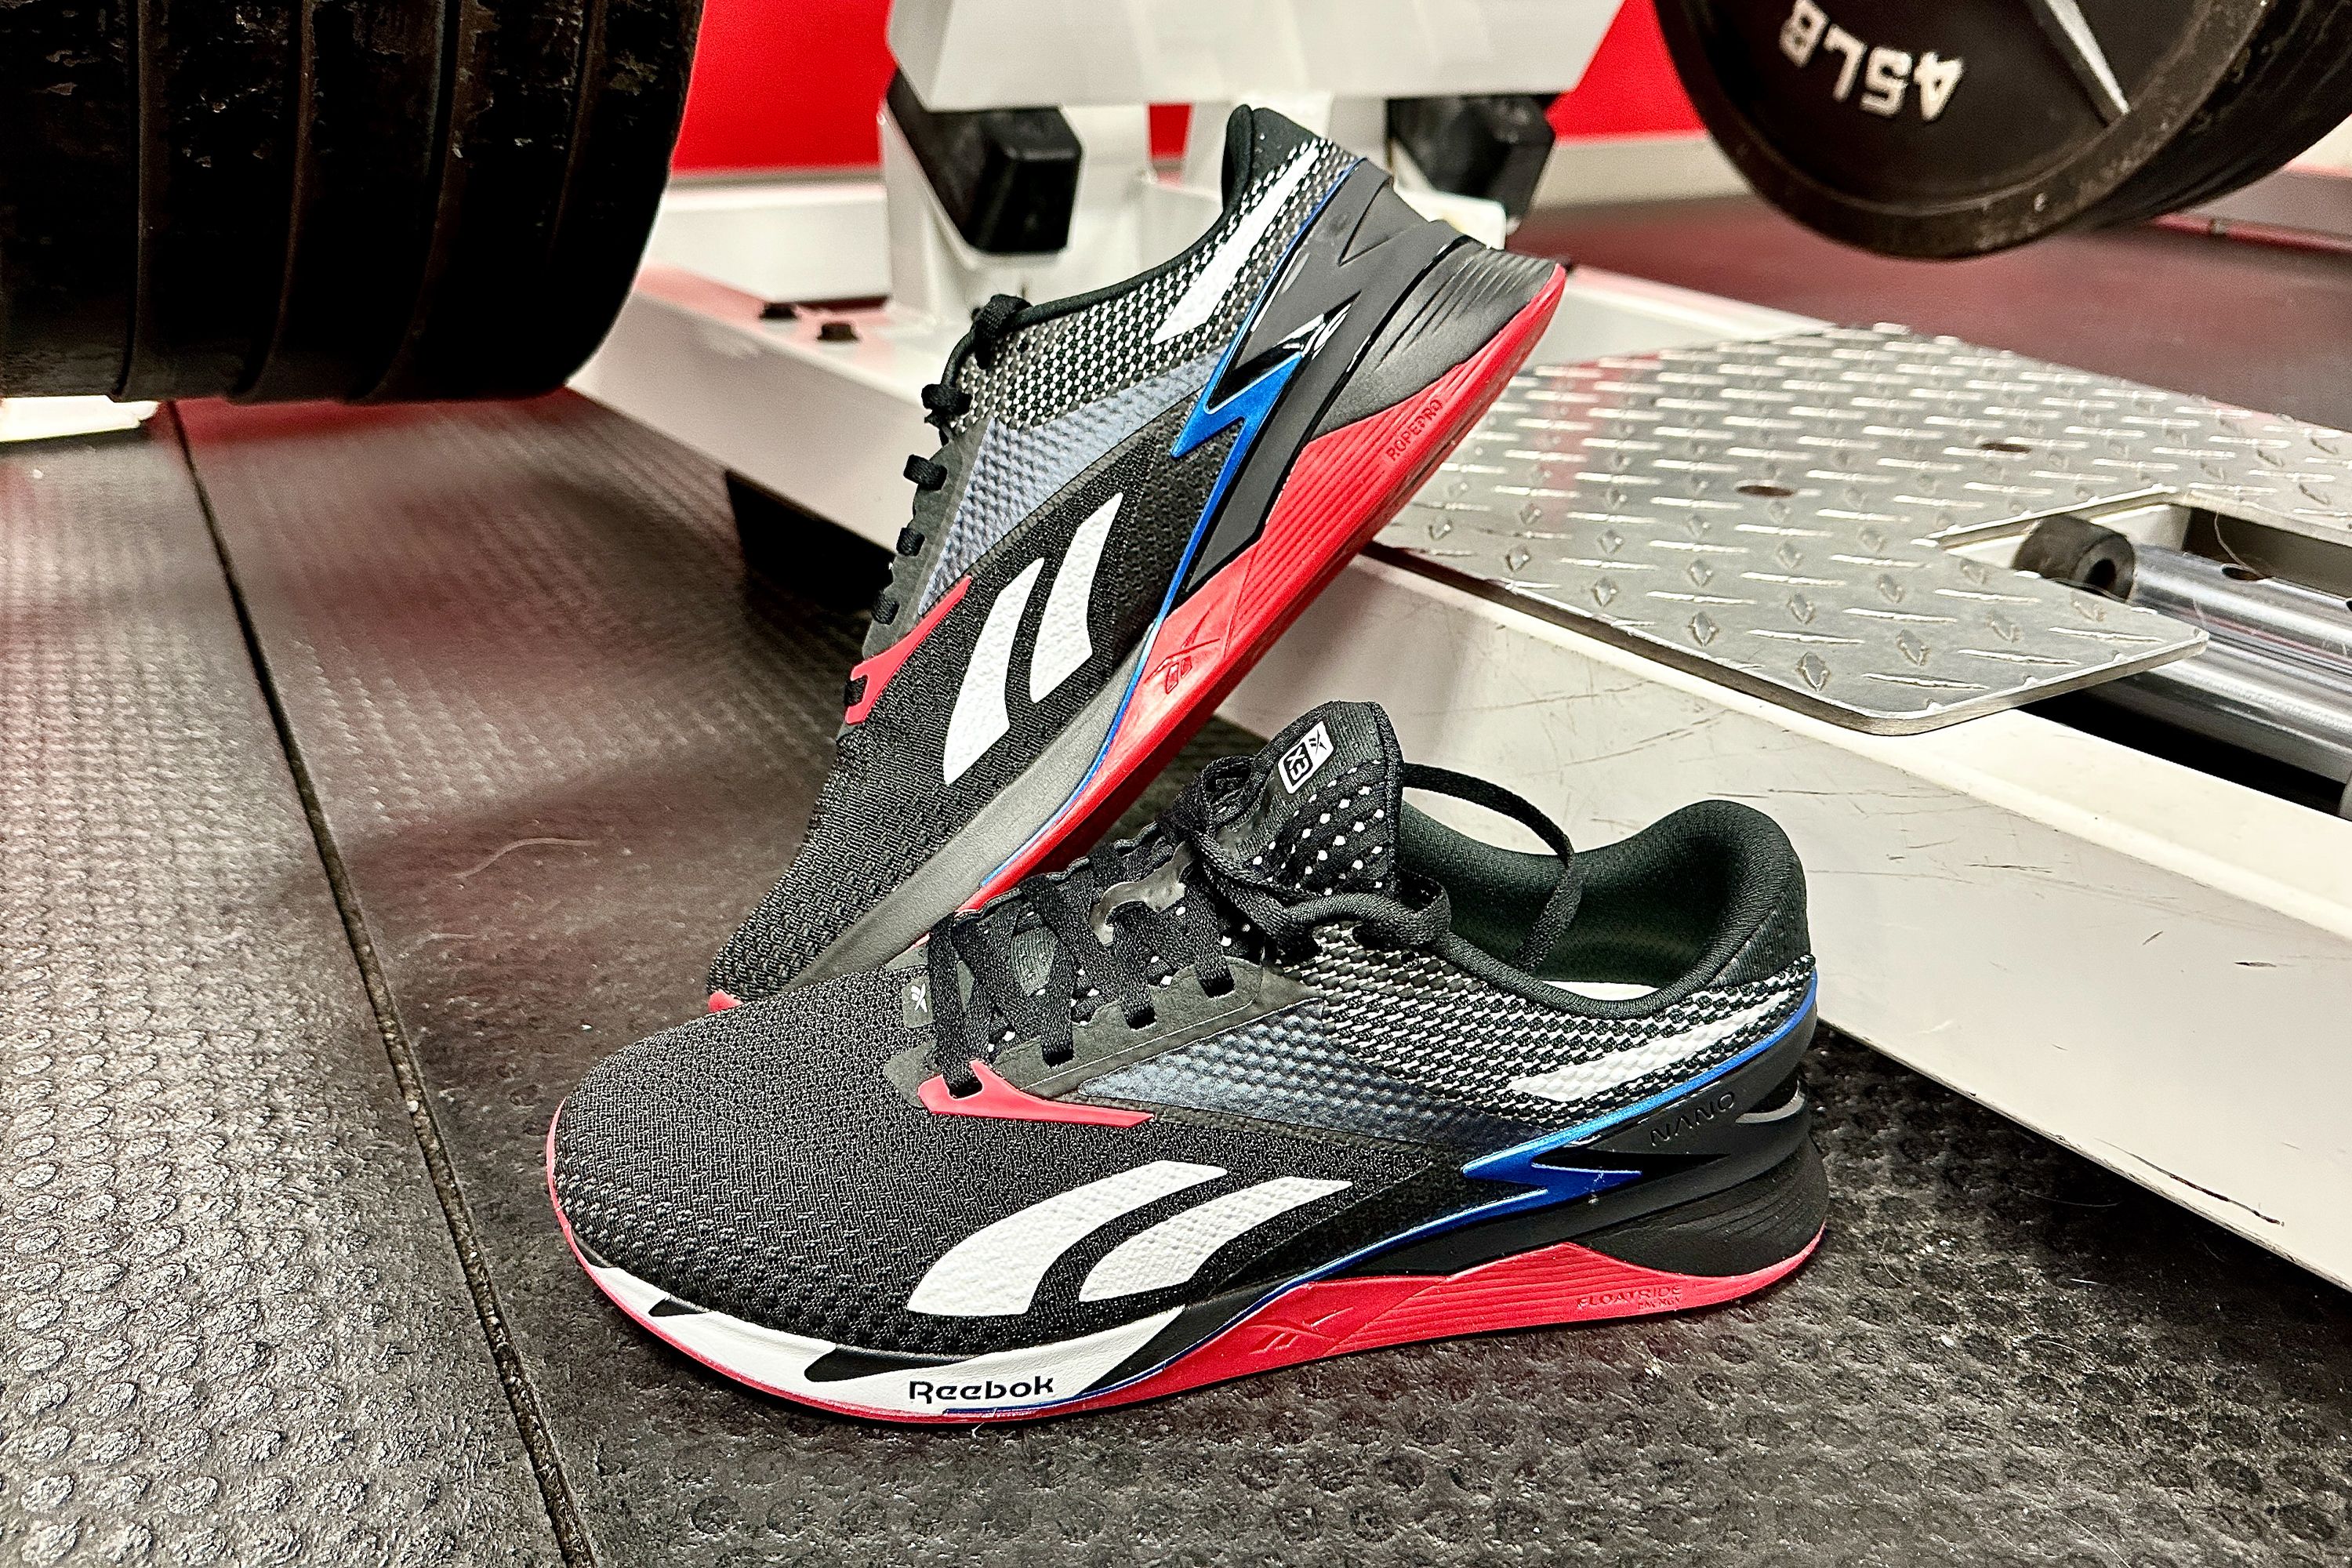 Reebok Nano Review: Are These the Brand's Best Trainers Yet?